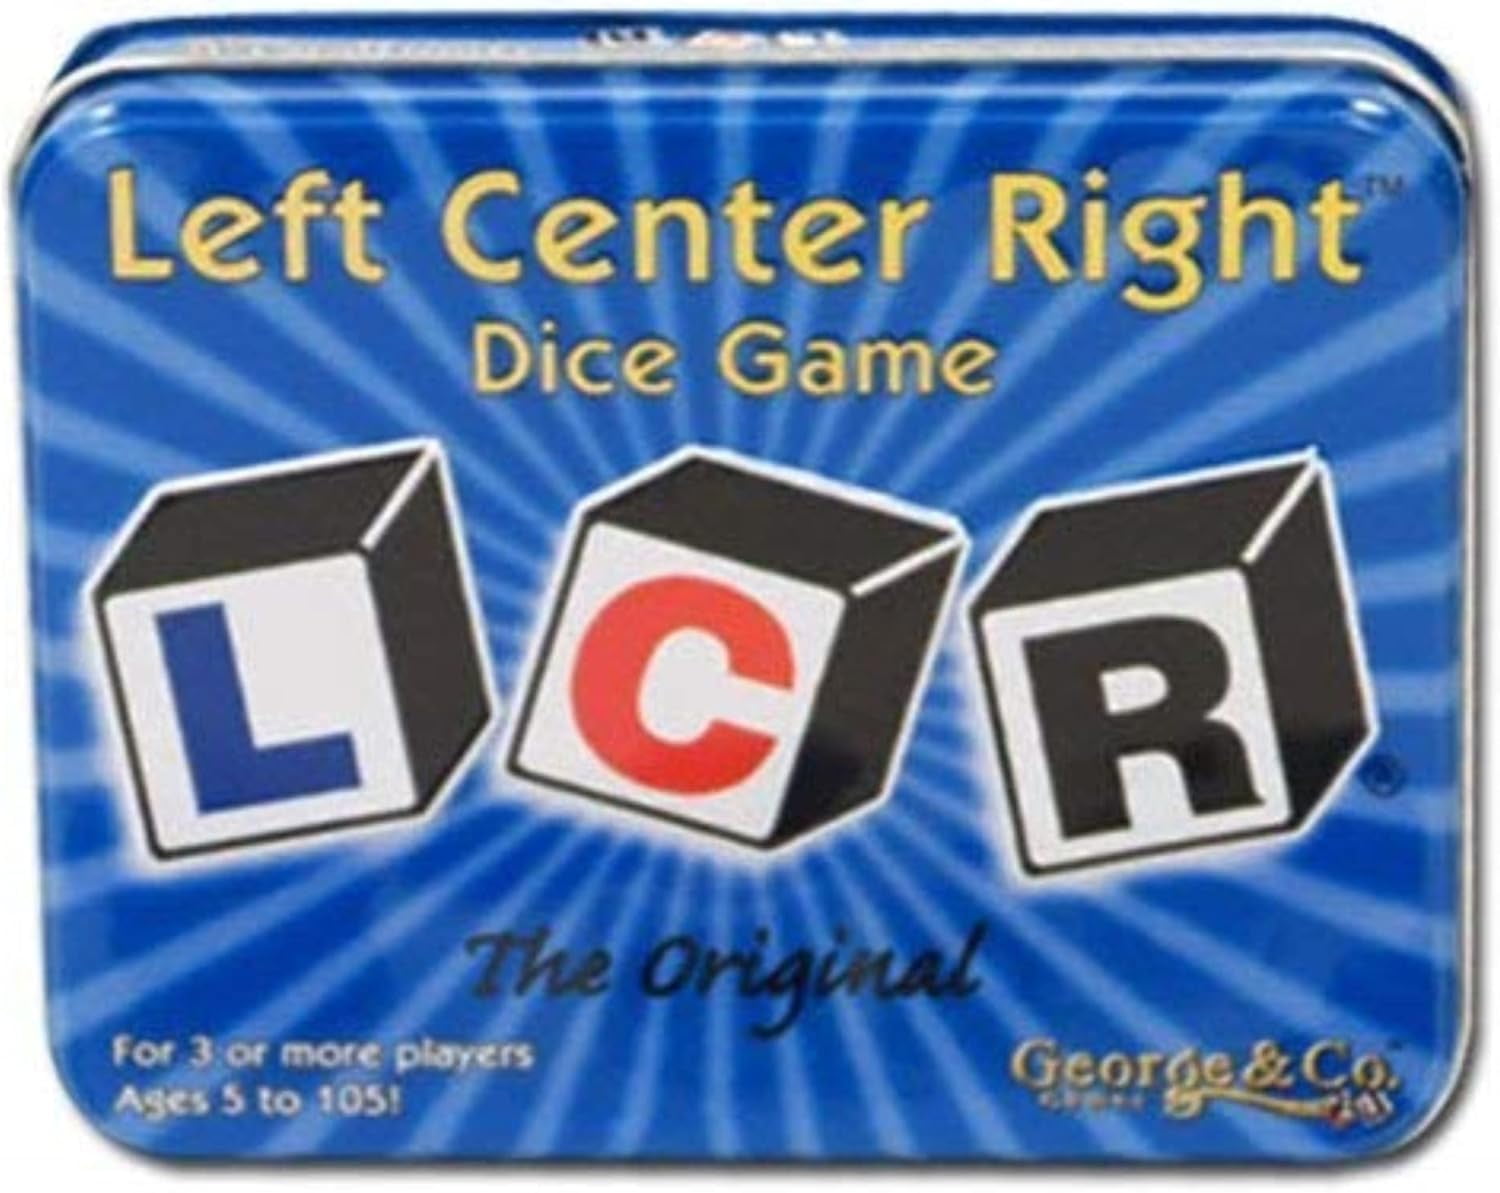 Left, Center, Right Dice Game, by Koplow Games